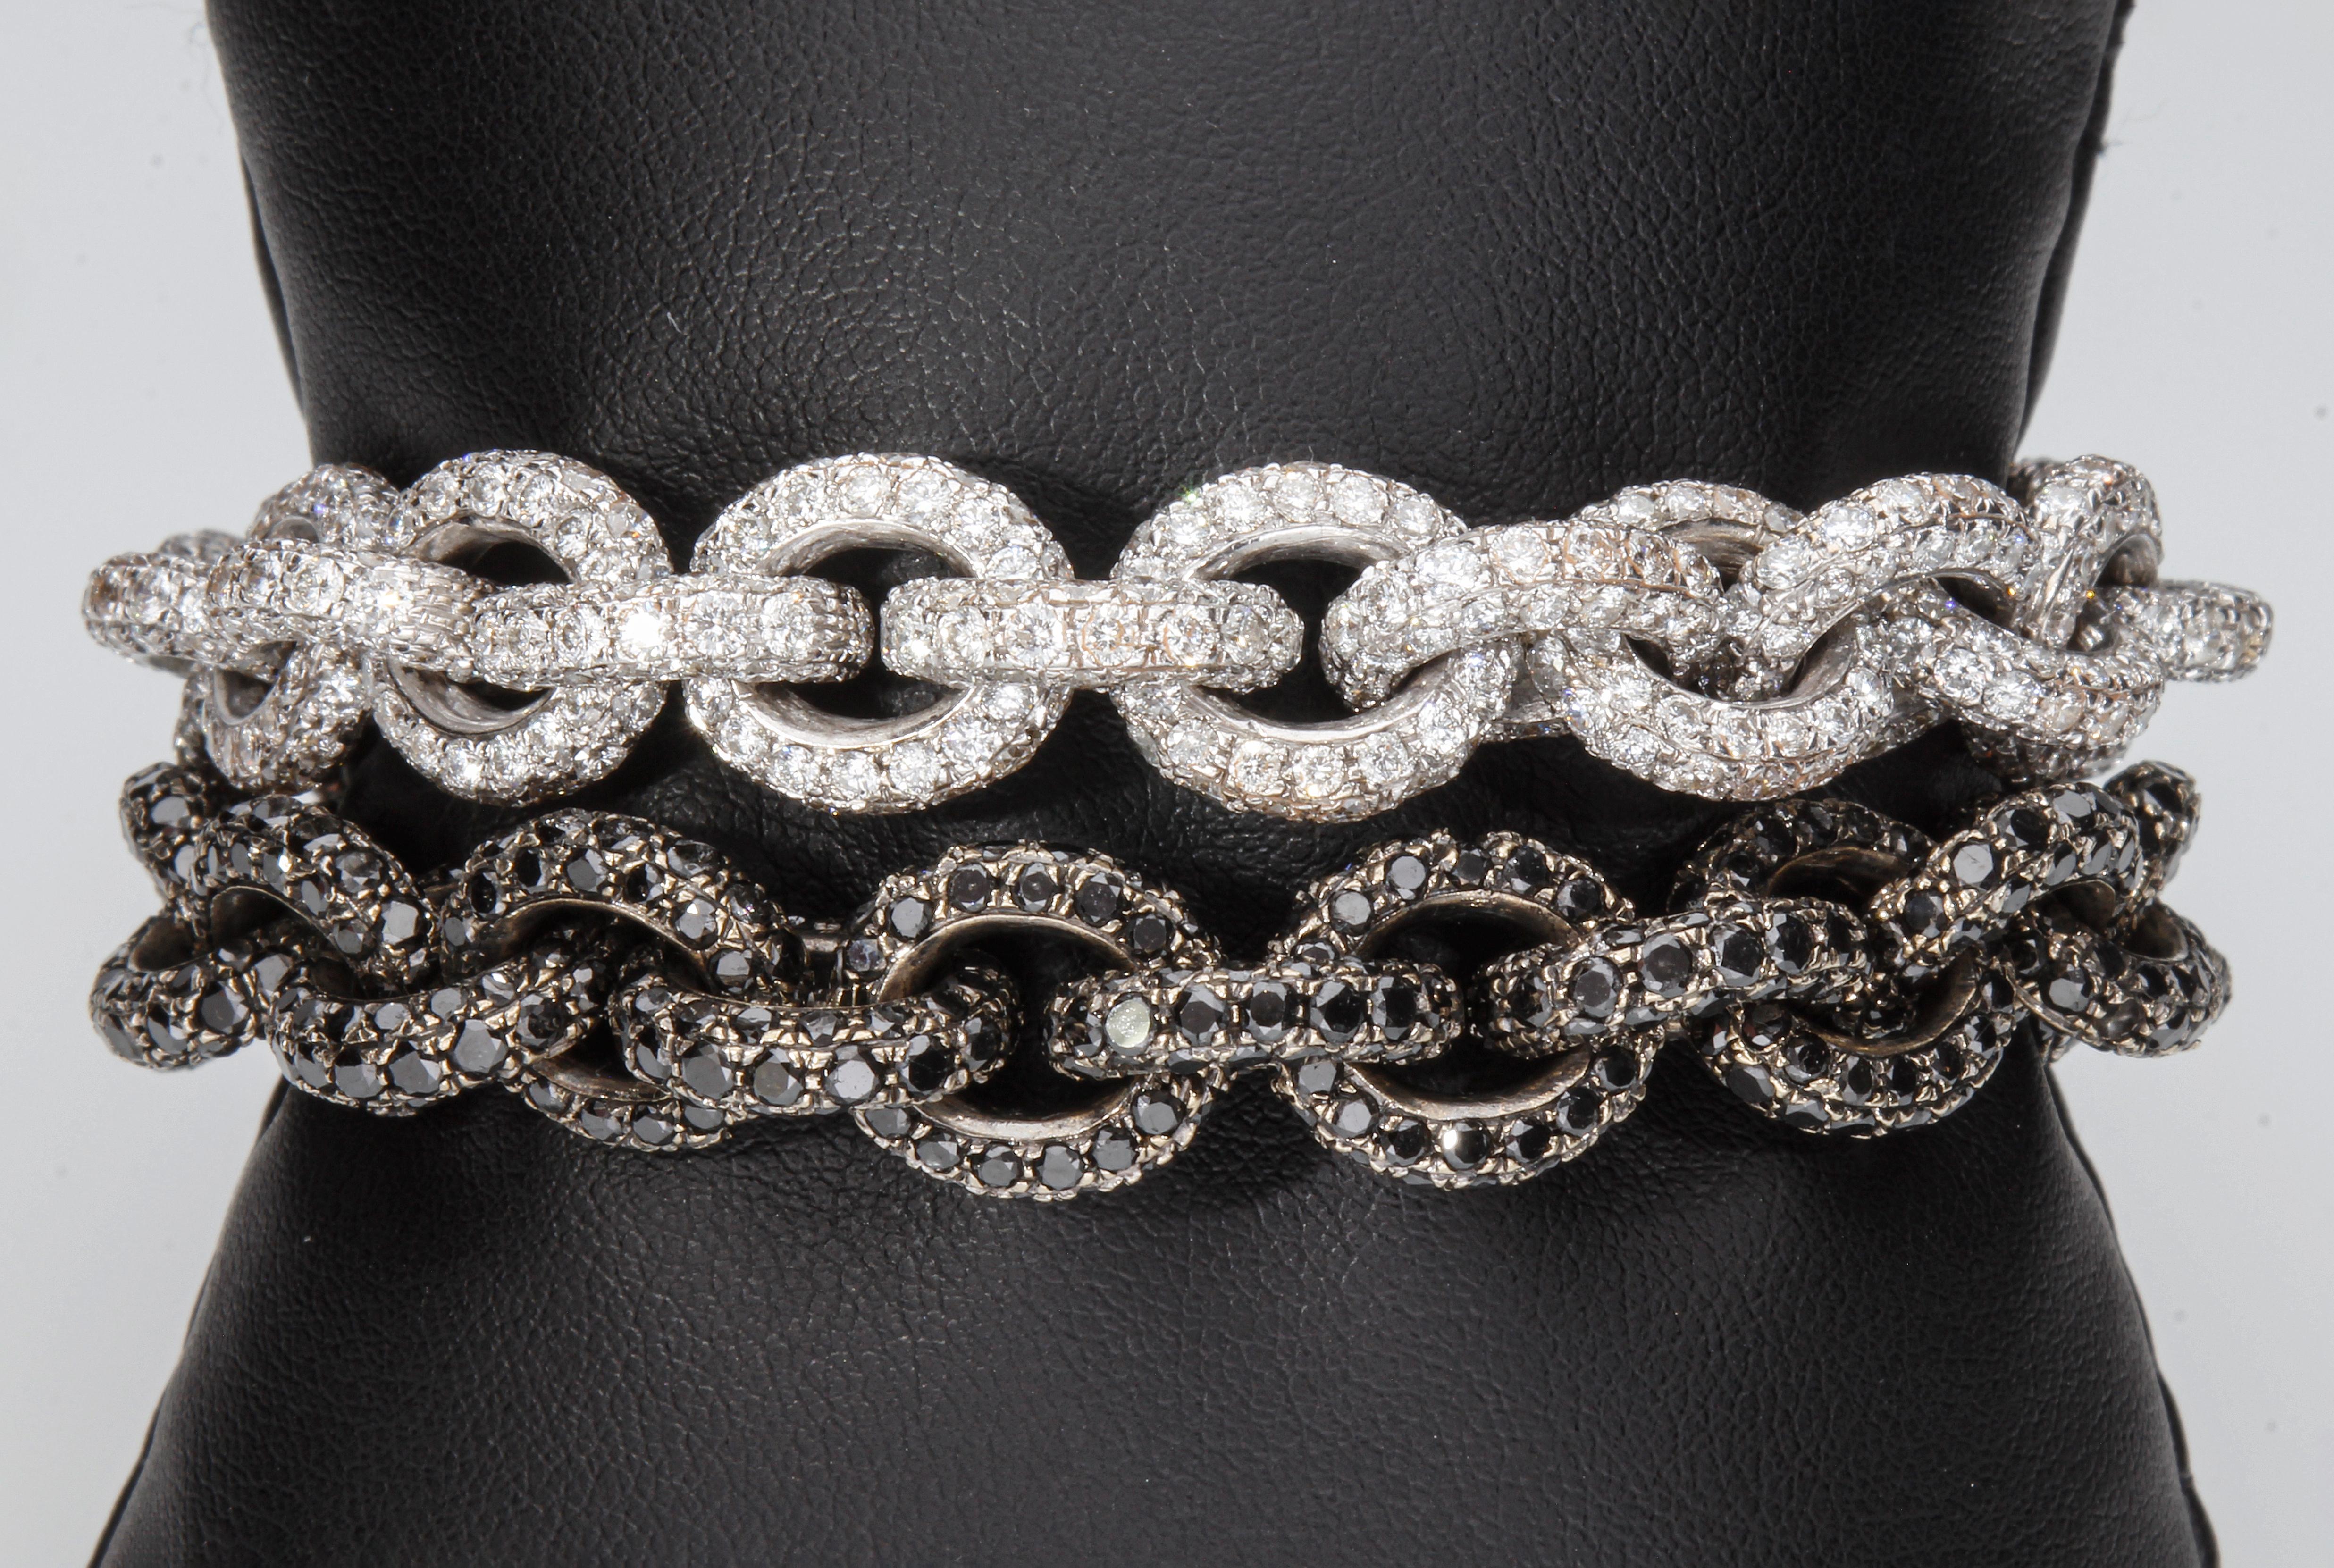 Chain Bracelet with 30.76 Ct of White Diamonds. Handmade. Made in Italy For Sale 4